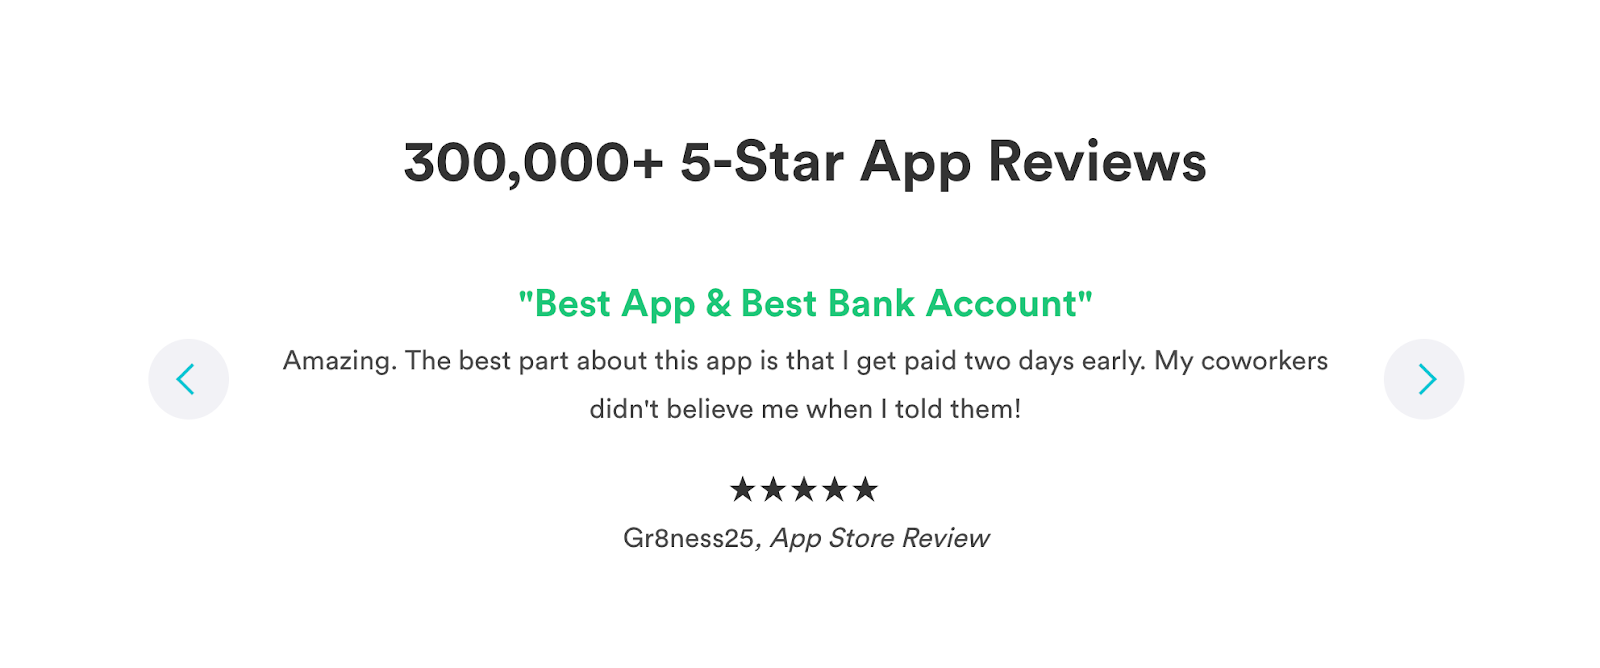 Ecommerce fulfillment: example of Social Proof: Chime App review. Source: https://www.chime.com/applyggspotme-2/